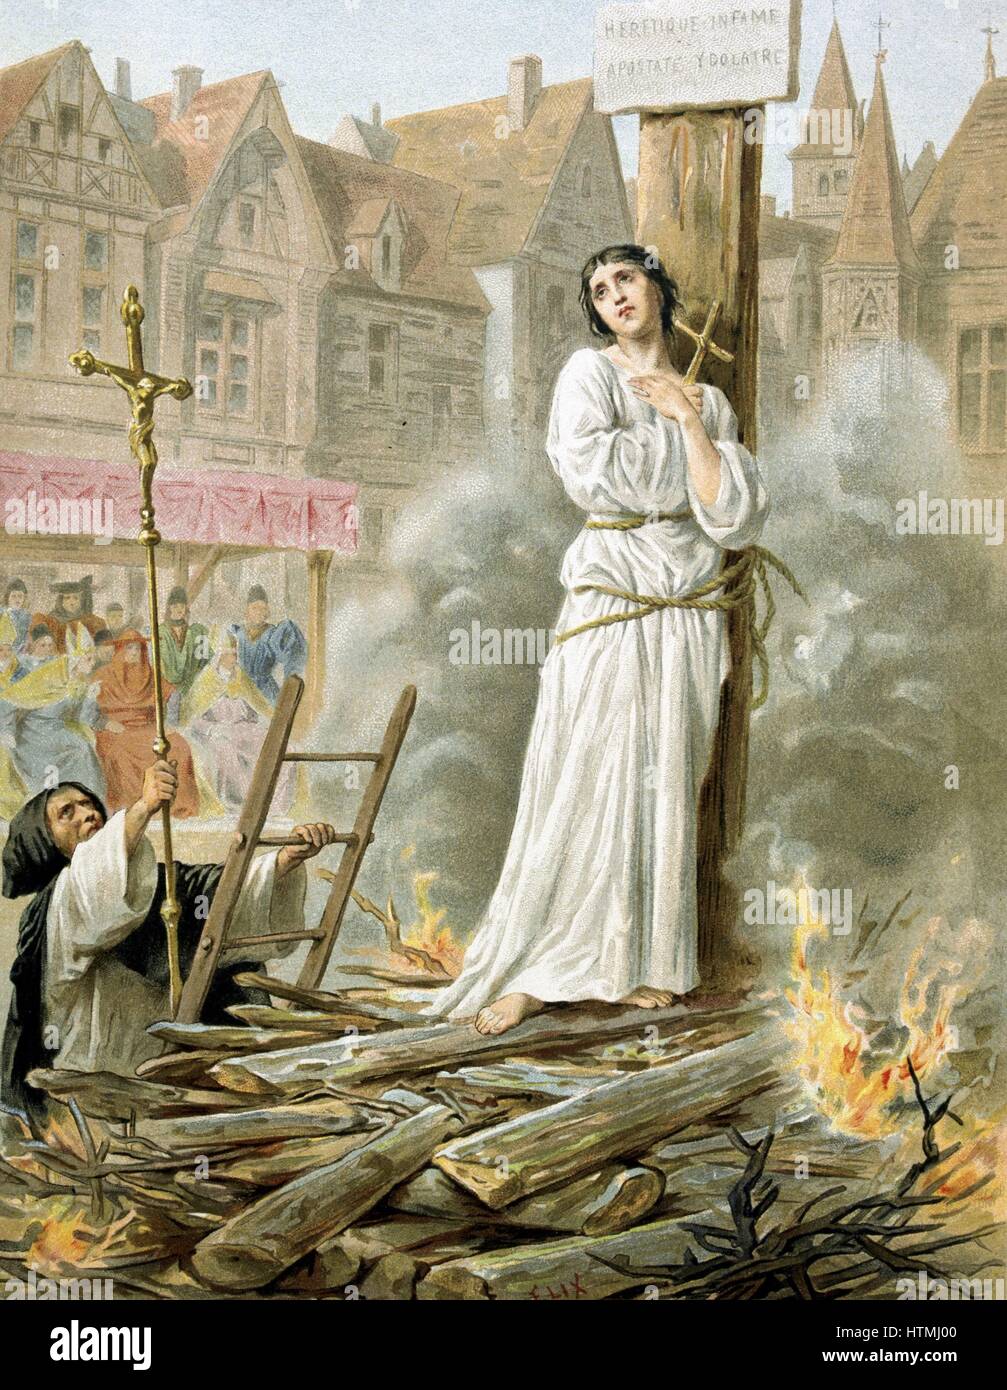 Joan of Arc (c1412-31) St Jeanne d'Arc, the Maid of Orleans, French patriot and martyr. Tried for heresy and sorcery and burnt at stake in market place at Rouen, 30 May 1431. 19th century chromolithograph Stock Photo